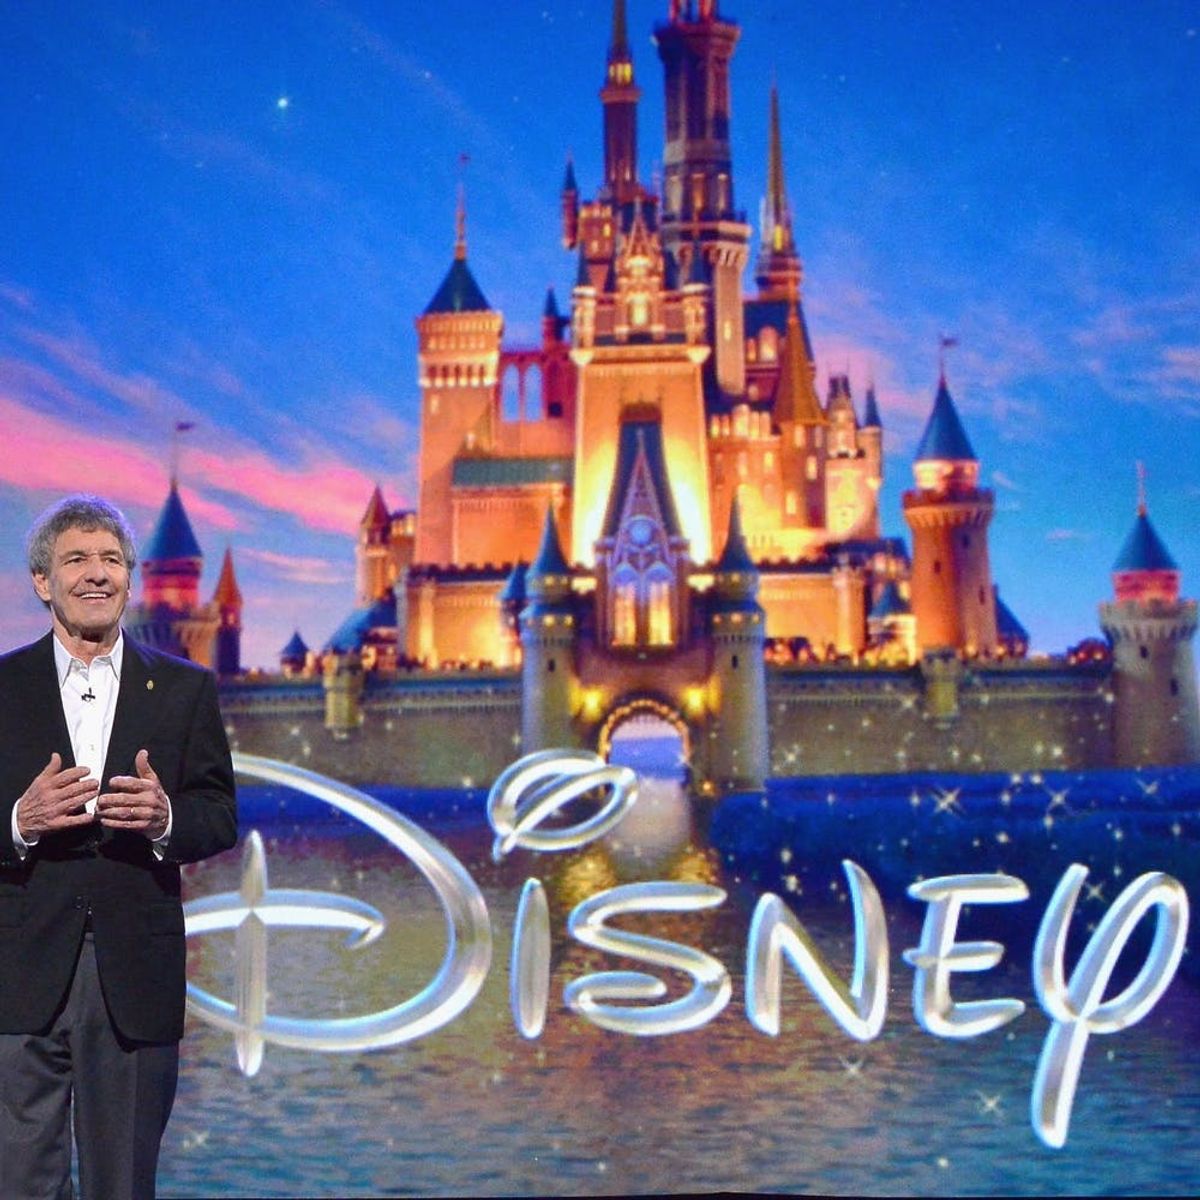 Disney’s Upcoming Streaming Service Has Some Amazing TV Shows and Movies Planned